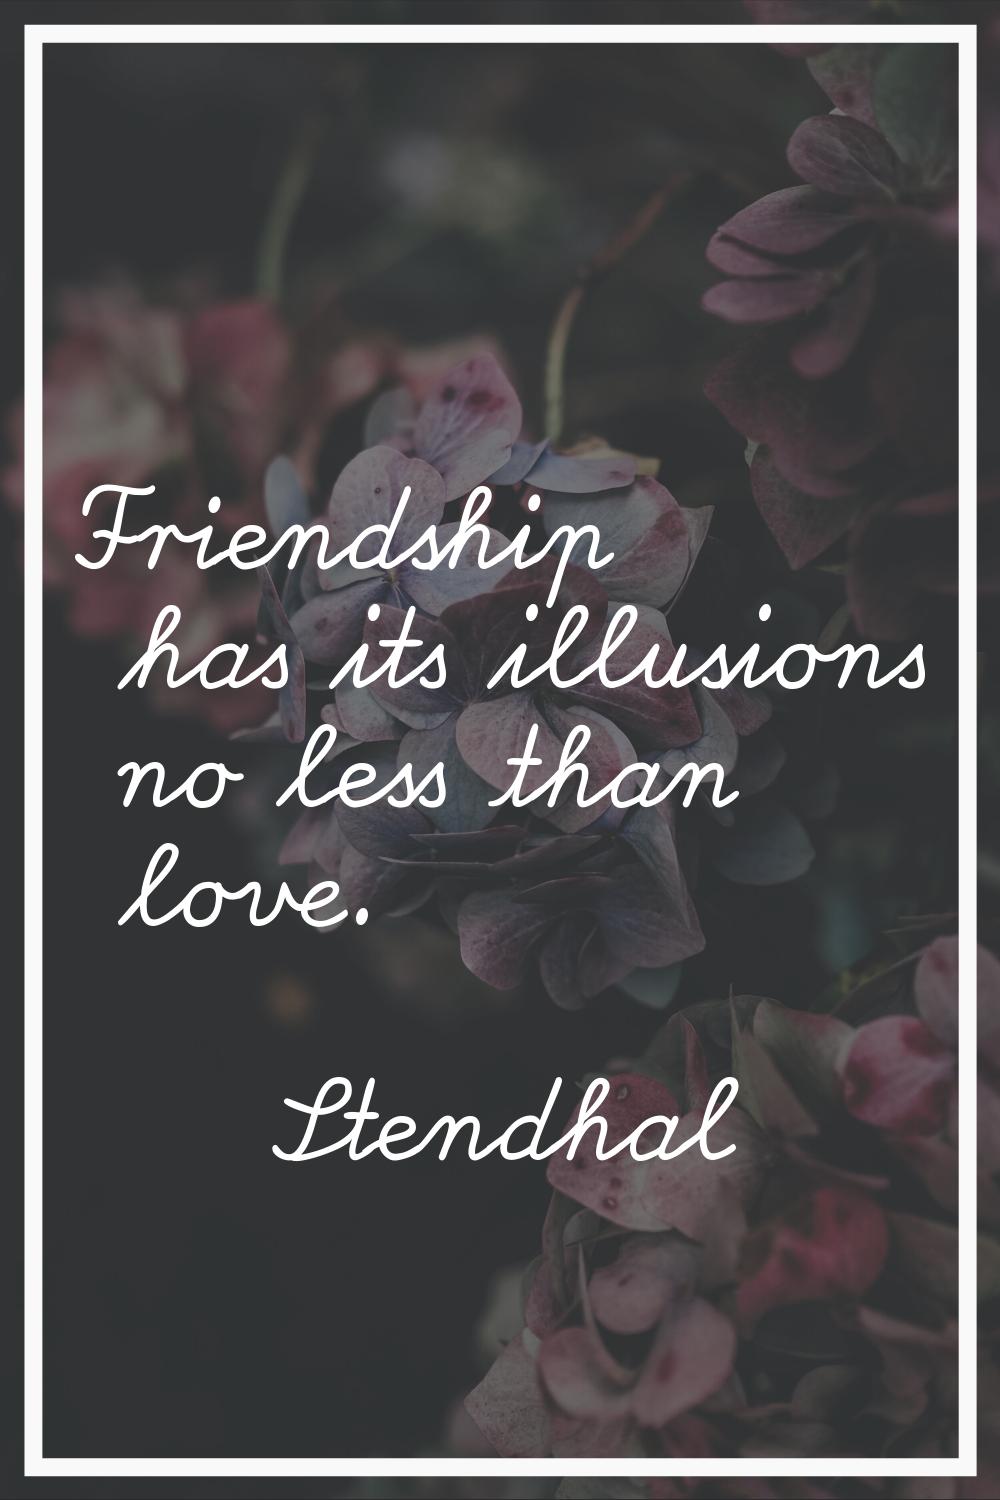 Friendship has its illusions no less than love.